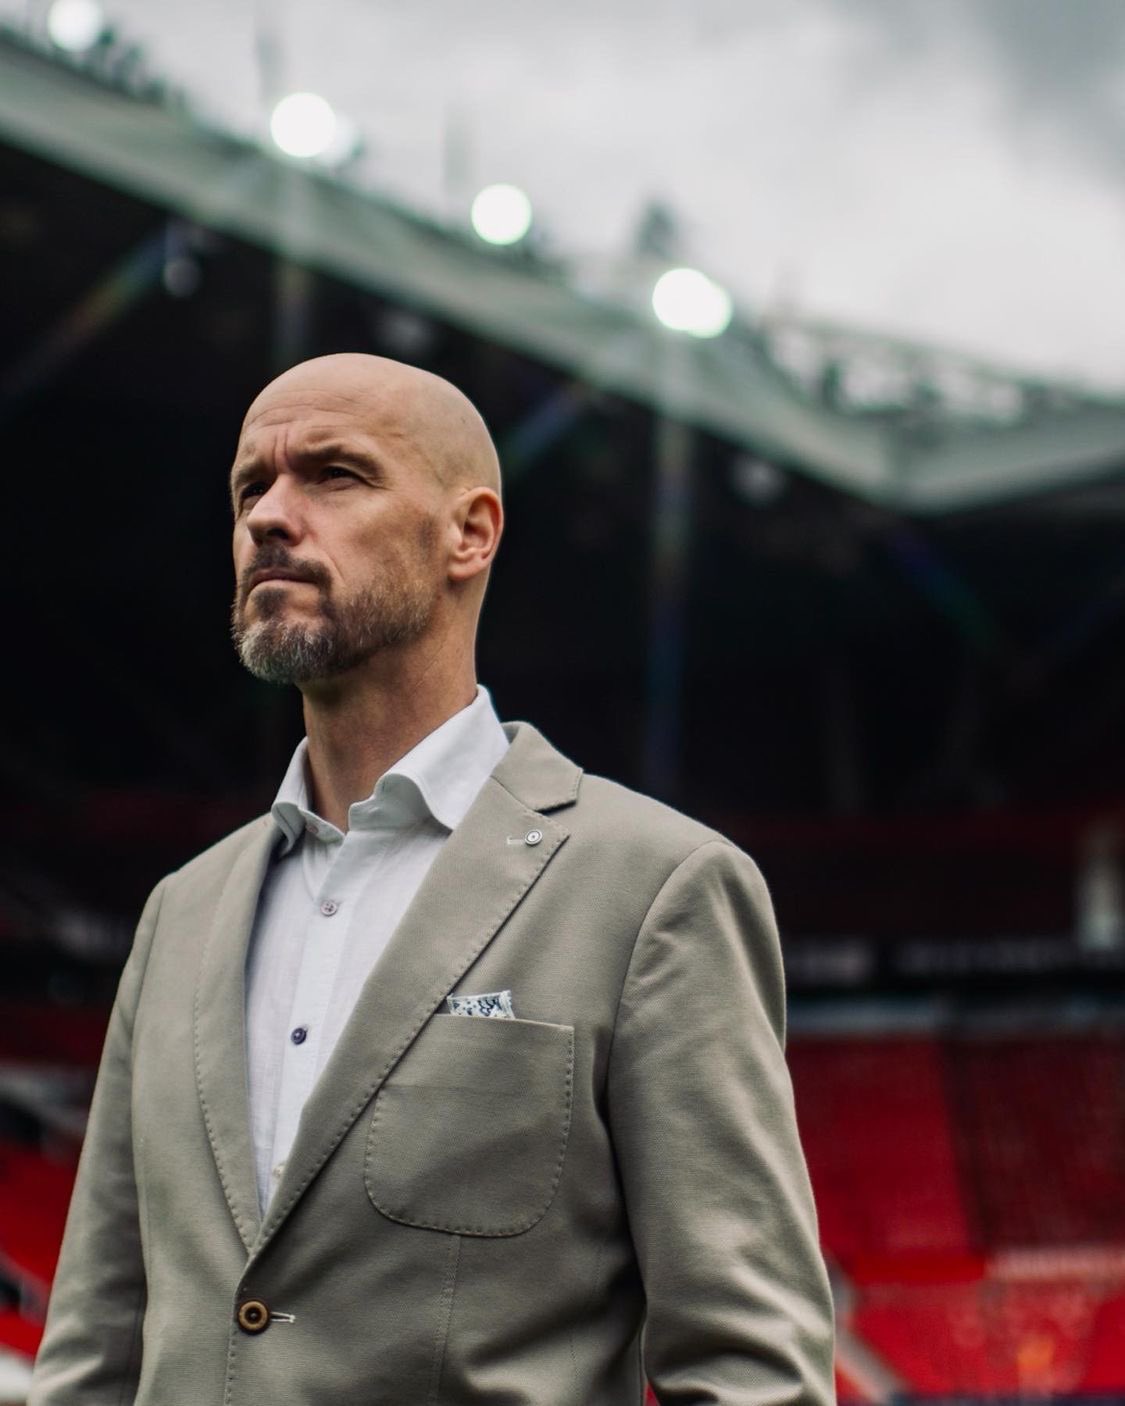 Premier League Fixtures 2022/23: Erik ten Hag era to BEGIN with Brighton test at Old Trafford, Man United face Liverpool & Man City in first 10 fixtures - Check out